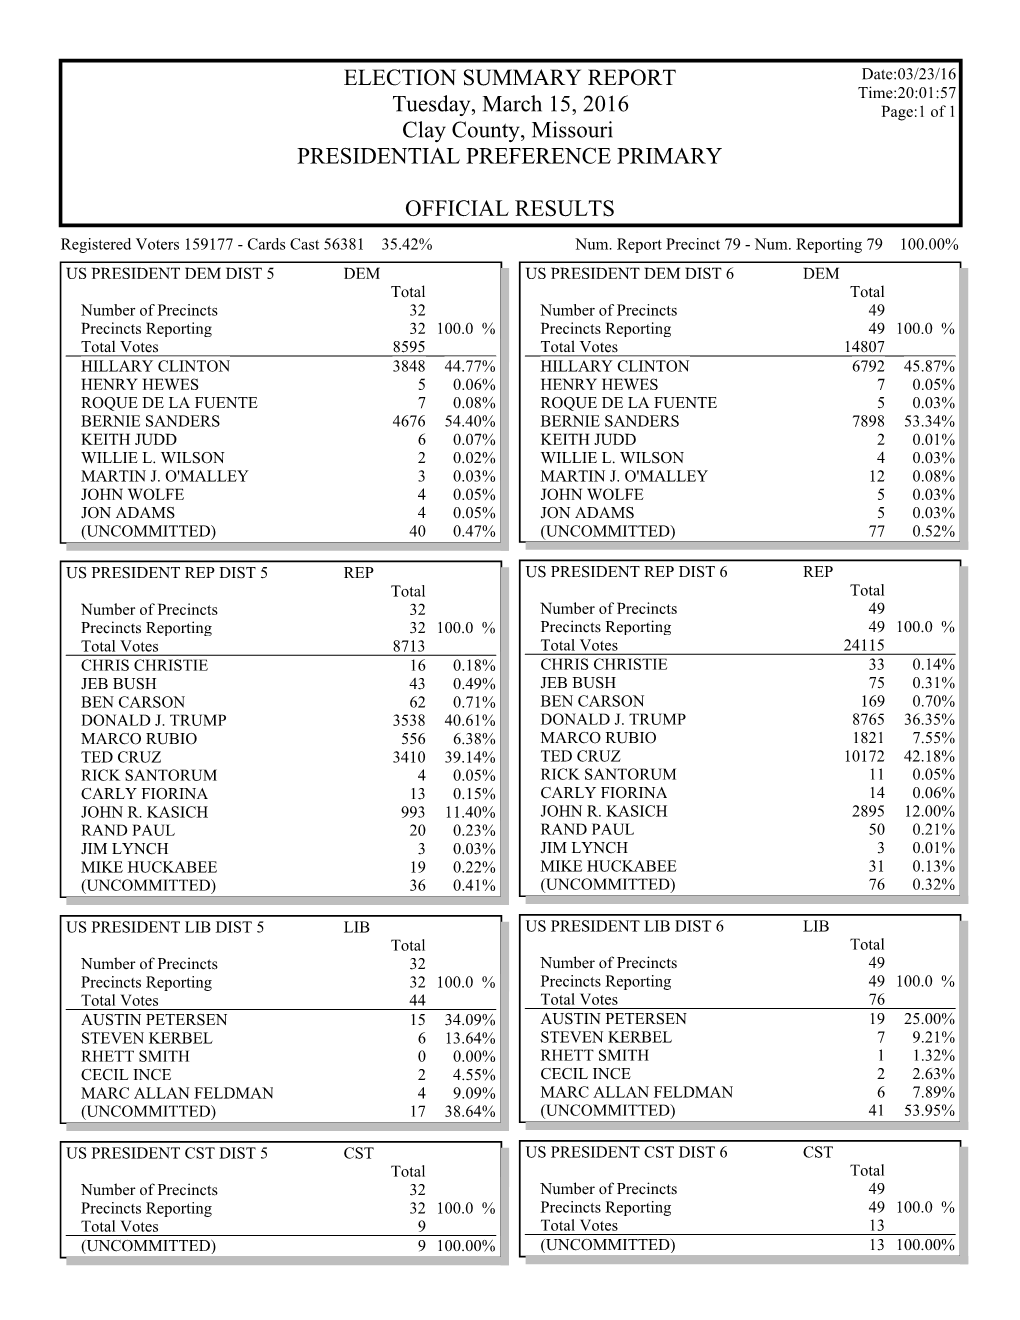 Clay County, Missouri PRESIDENTIAL PREFERENCE PRIMARY